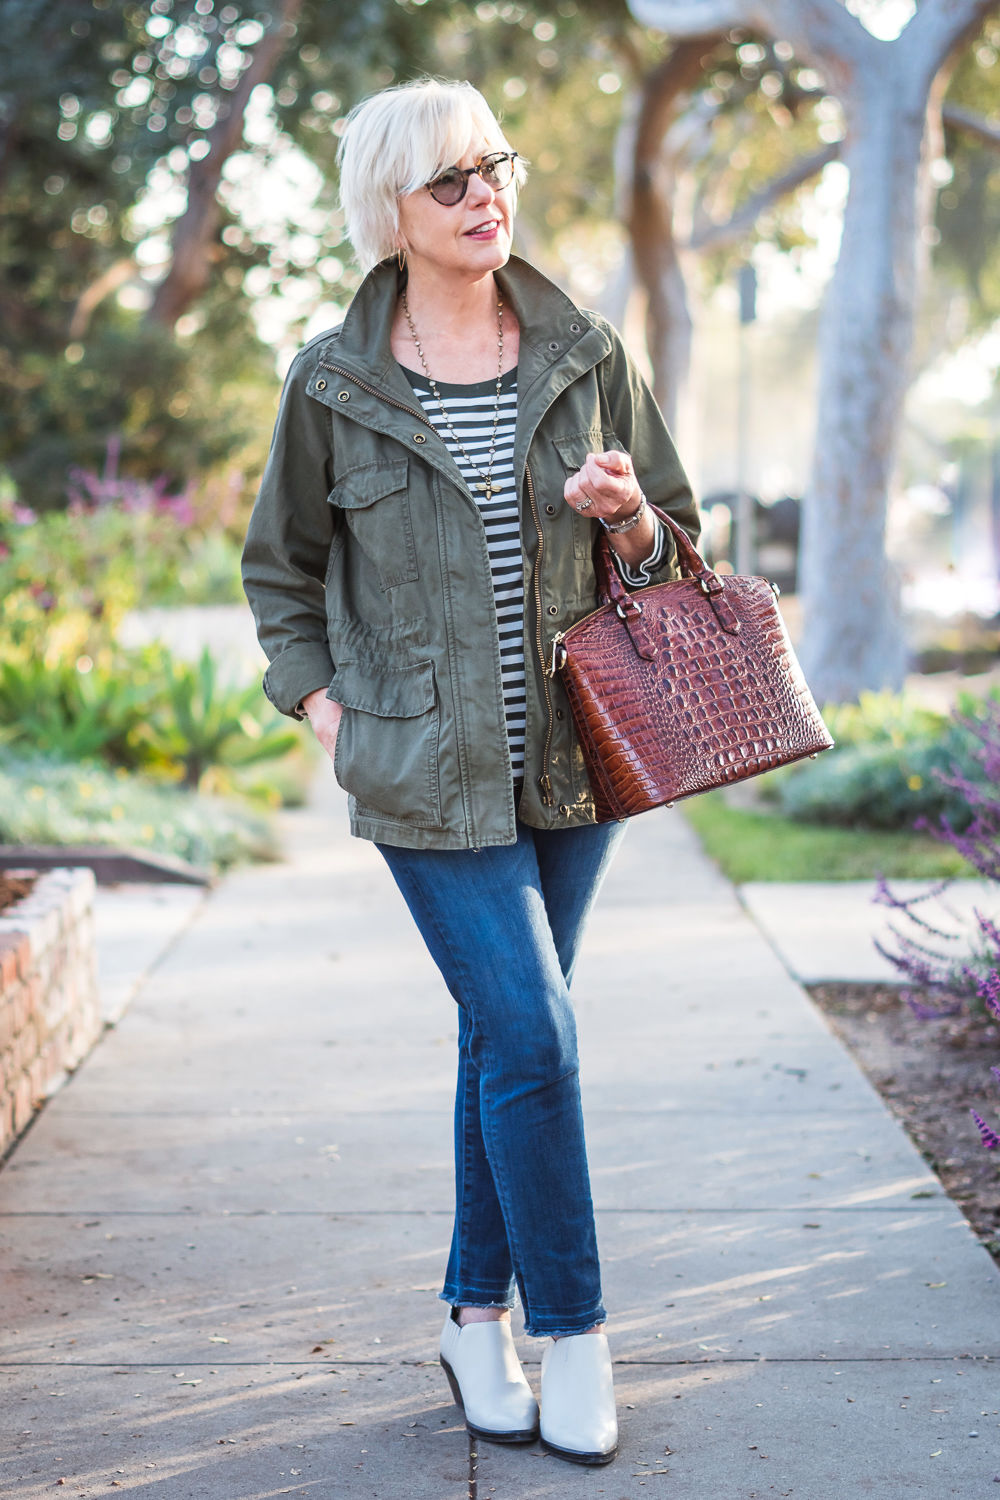 How to wear white boots with jeans: style blogger Susan B. wears a casual look with striped tee, utility jacket, jeans and white boots. Details at une femme d'un certain age.